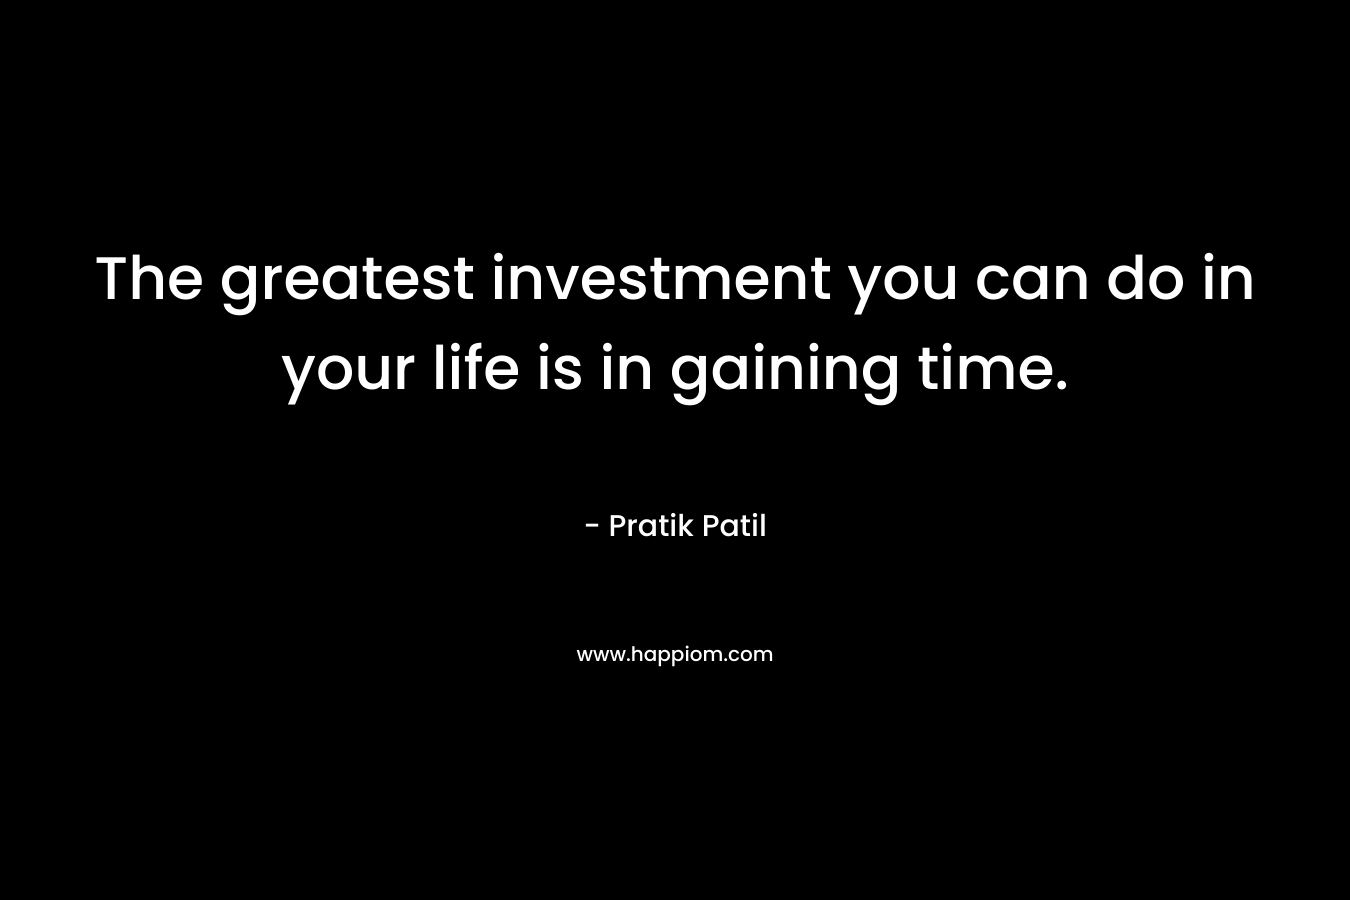 The greatest investment you can do in your life is in gaining time. – Pratik Patil